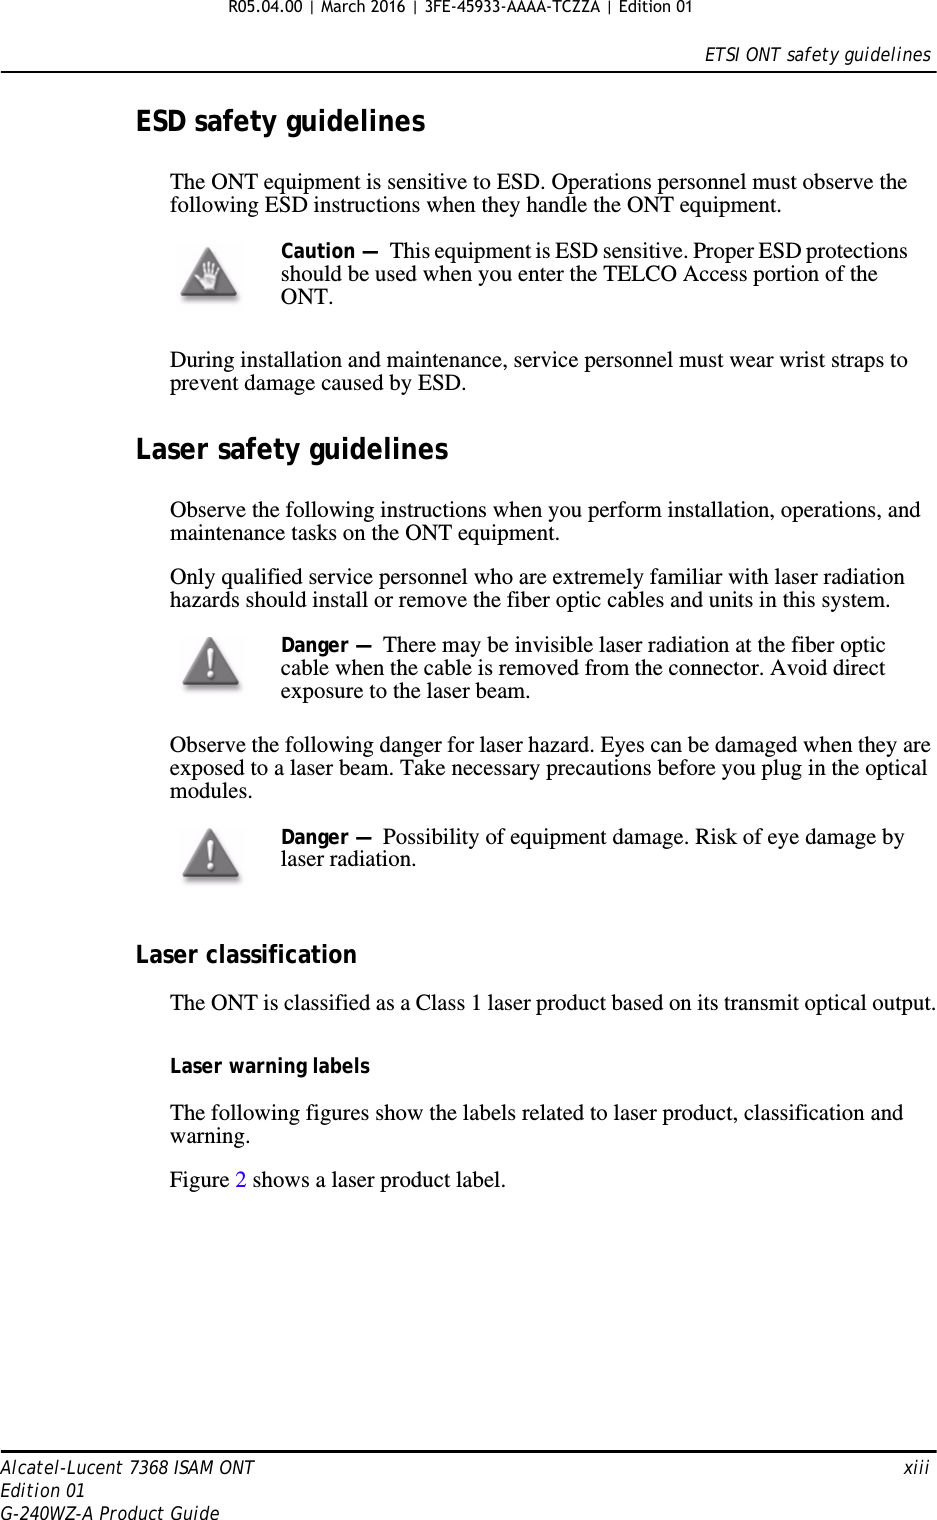 ETSI ONT safety guidelinesAlcatel-Lucent 7368 ISAM ONT   xiiiEdition 01G-240WZ-A Product GuideESD safety guidelinesThe ONT equipment is sensitive to ESD. Operations personnel must observe the following ESD instructions when they handle the ONT equipment. During installation and maintenance, service personnel must wear wrist straps to prevent damage caused by ESD.Laser safety guidelinesObserve the following instructions when you perform installation, operations, and maintenance tasks on the ONT equipment.Only qualified service personnel who are extremely familiar with laser radiation hazards should install or remove the fiber optic cables and units in this system.Observe the following danger for laser hazard. Eyes can be damaged when they are exposed to a laser beam. Take necessary precautions before you plug in the optical modules.Laser classificationThe ONT is classified as a Class 1 laser product based on its transmit optical output.Laser warning labelsThe following figures show the labels related to laser product, classification and warning. Figure 2 shows a laser product label.Caution —  This equipment is ESD sensitive. Proper ESD protections should be used when you enter the TELCO Access portion of the ONT.Danger —  There may be invisible laser radiation at the fiber optic cable when the cable is removed from the connector. Avoid direct exposure to the laser beam.Danger —  Possibility of equipment damage. Risk of eye damage by laser radiation.R05.04.00 | March 2016 | 3FE-45933-AAAA-TCZZA | Edition 01 